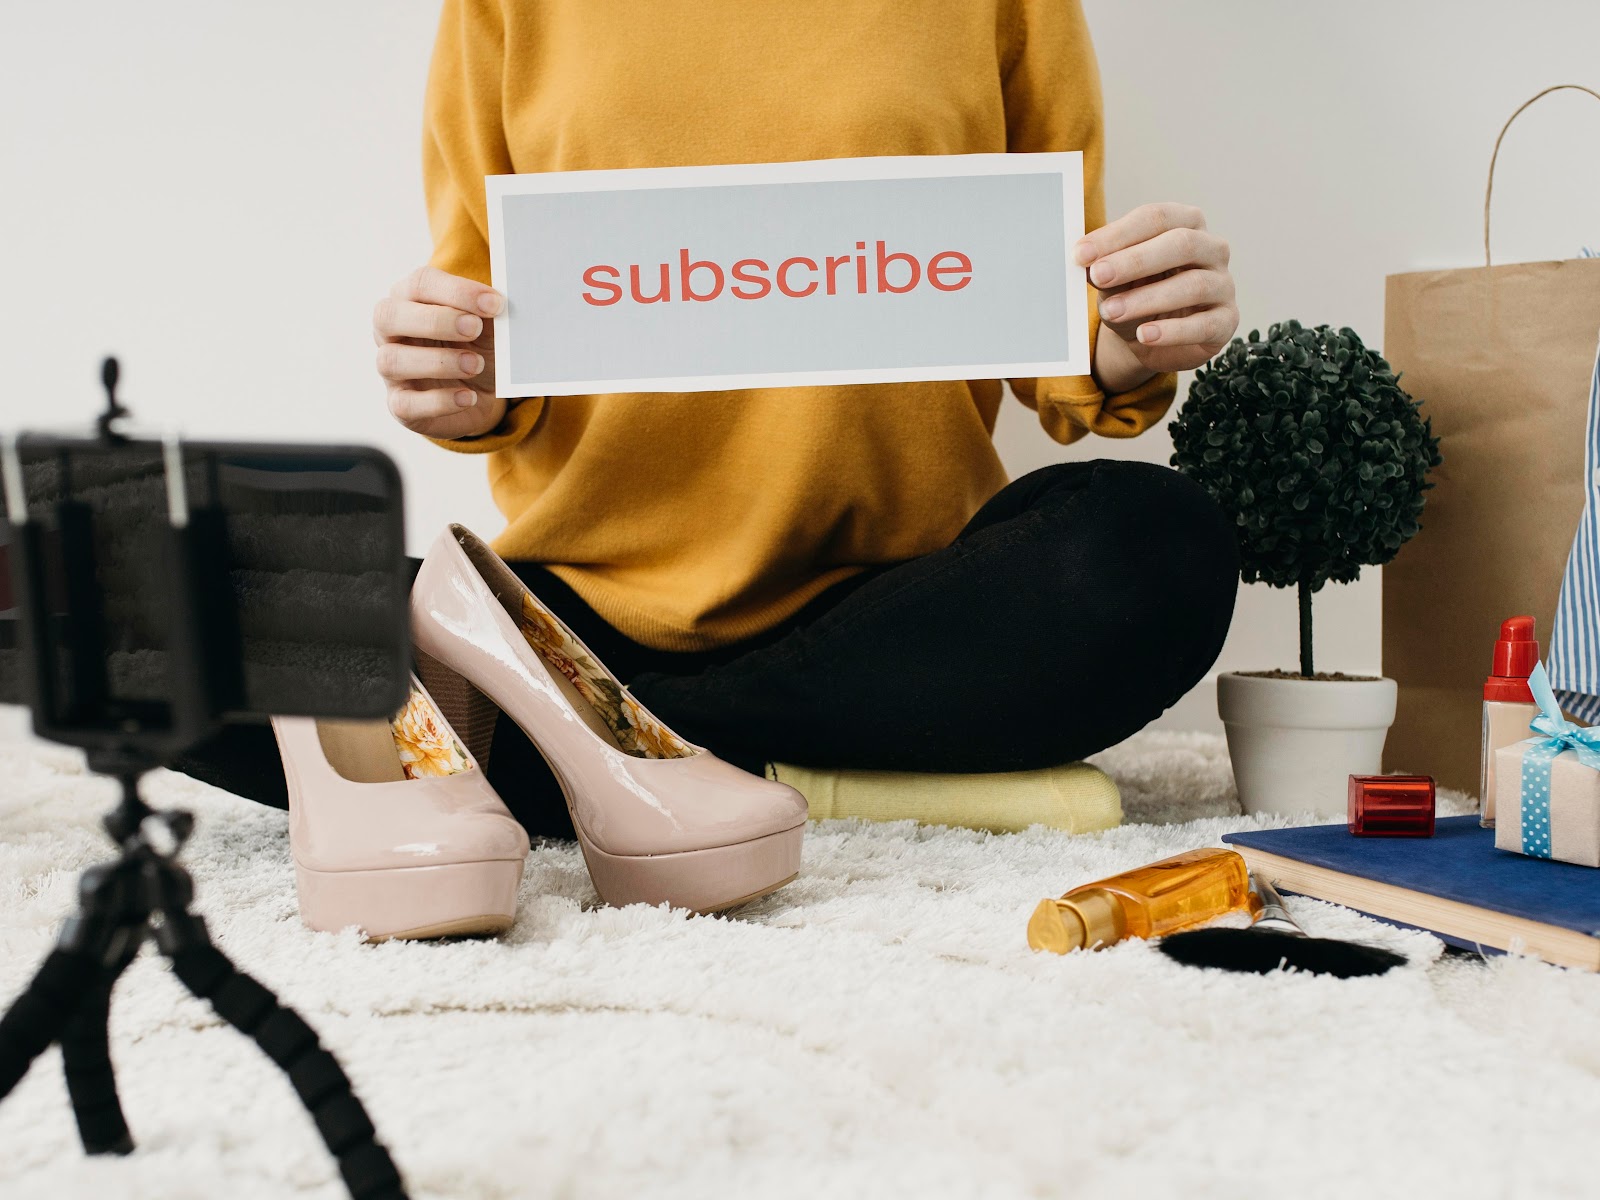 Female fashion blogger streaming at home with smartphone and subscribe word